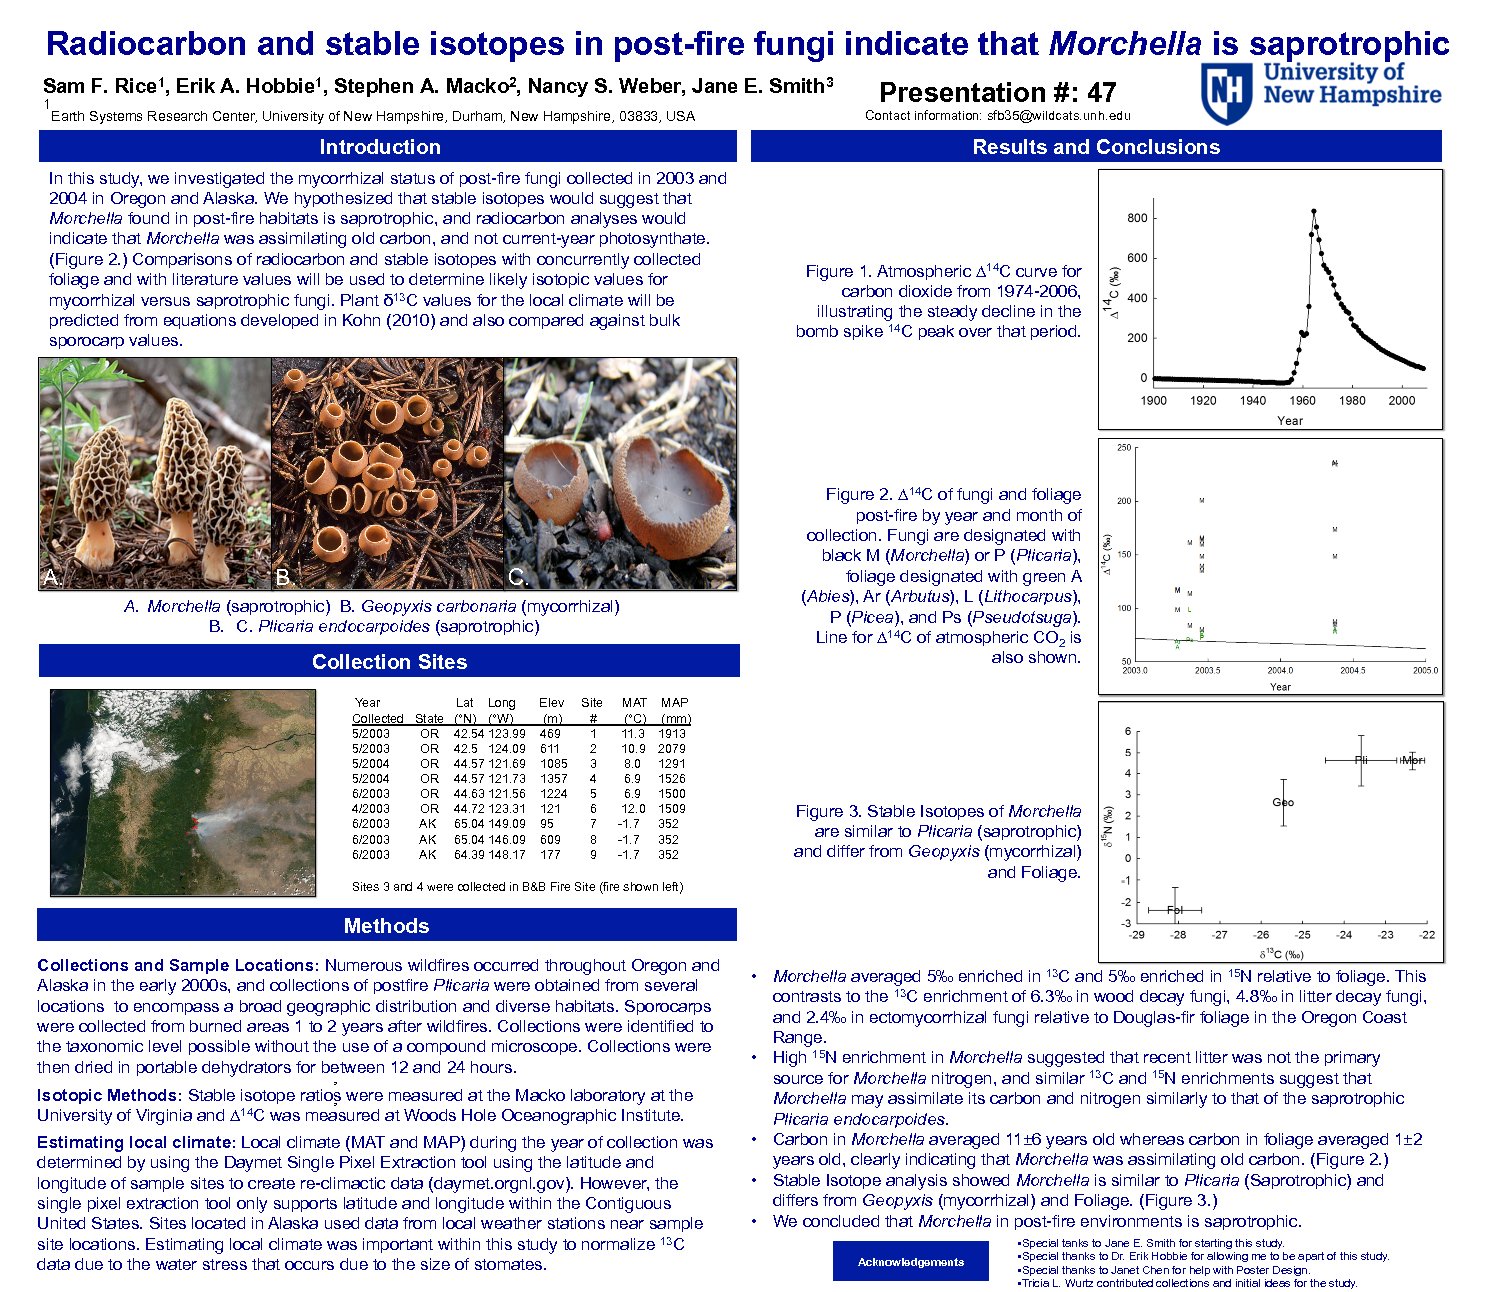 Radiocarbon And Stable Isotopes In Post-Fire Fungi Indicate That Morchella Is Saprotrophic by sfb35